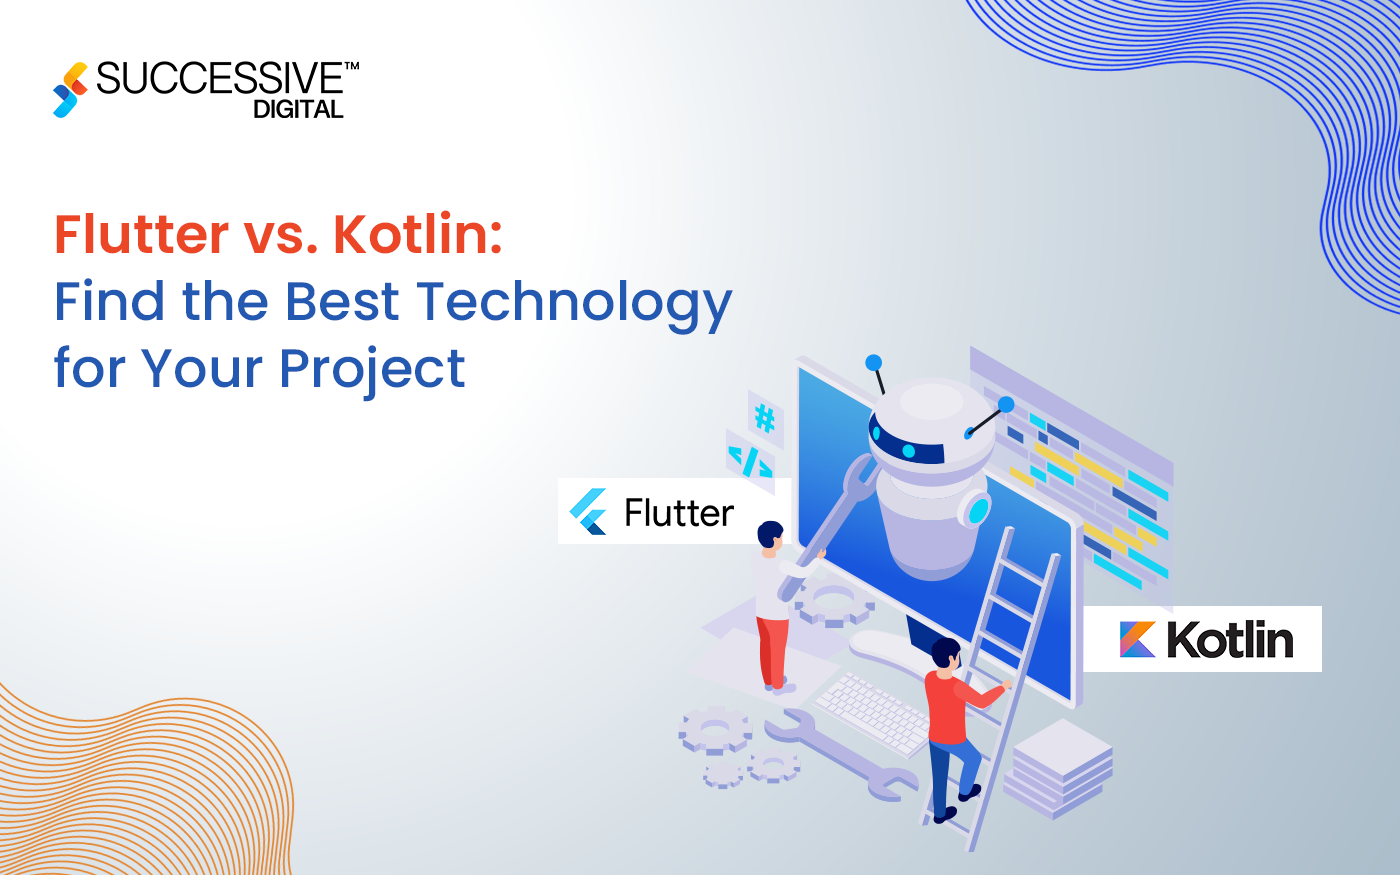 Flutter vs. Kotlin: Which Is the Best Fit for Your Next Project?